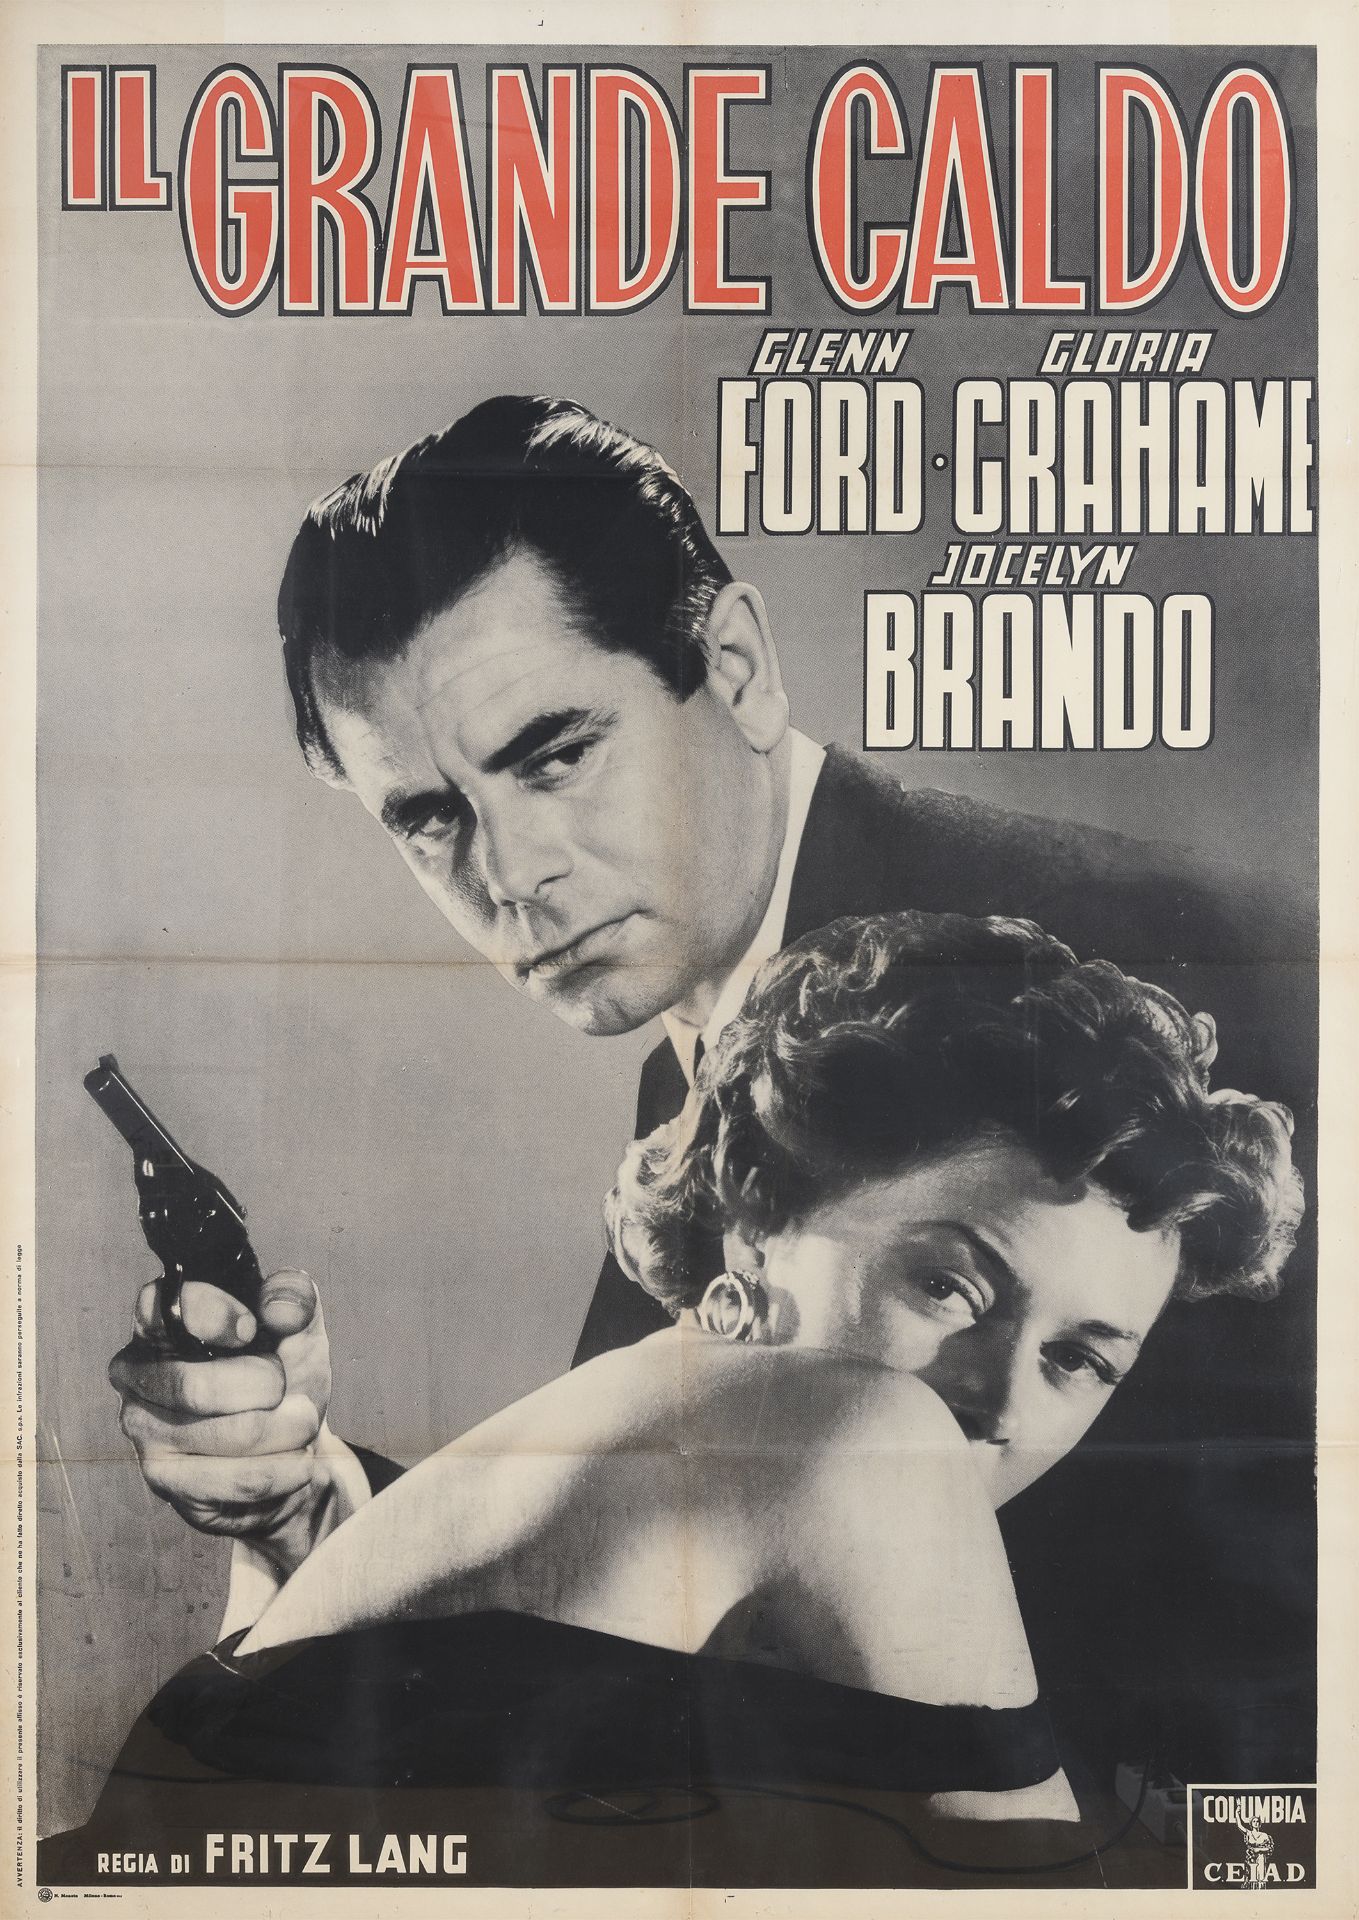 ORIGINAL POSTER FOR THE FILM THE BIG HEAT 1953